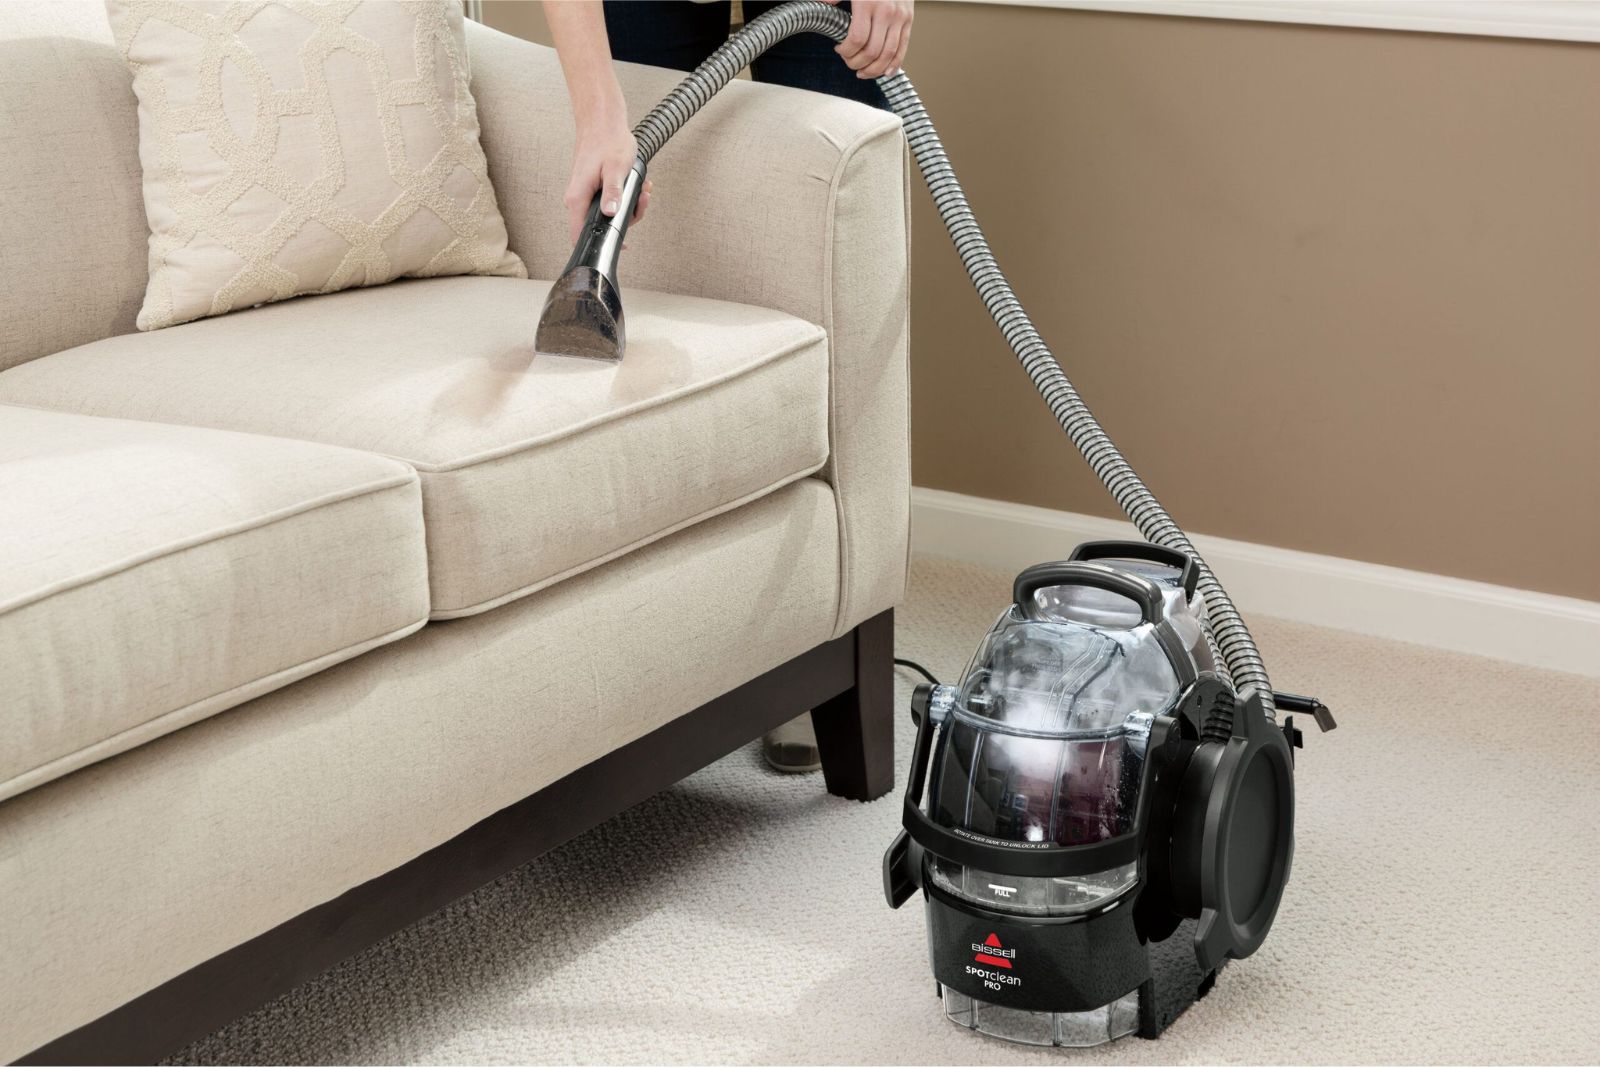 13 Superior Steam Cleaner Carpet And Upholstery for 2023